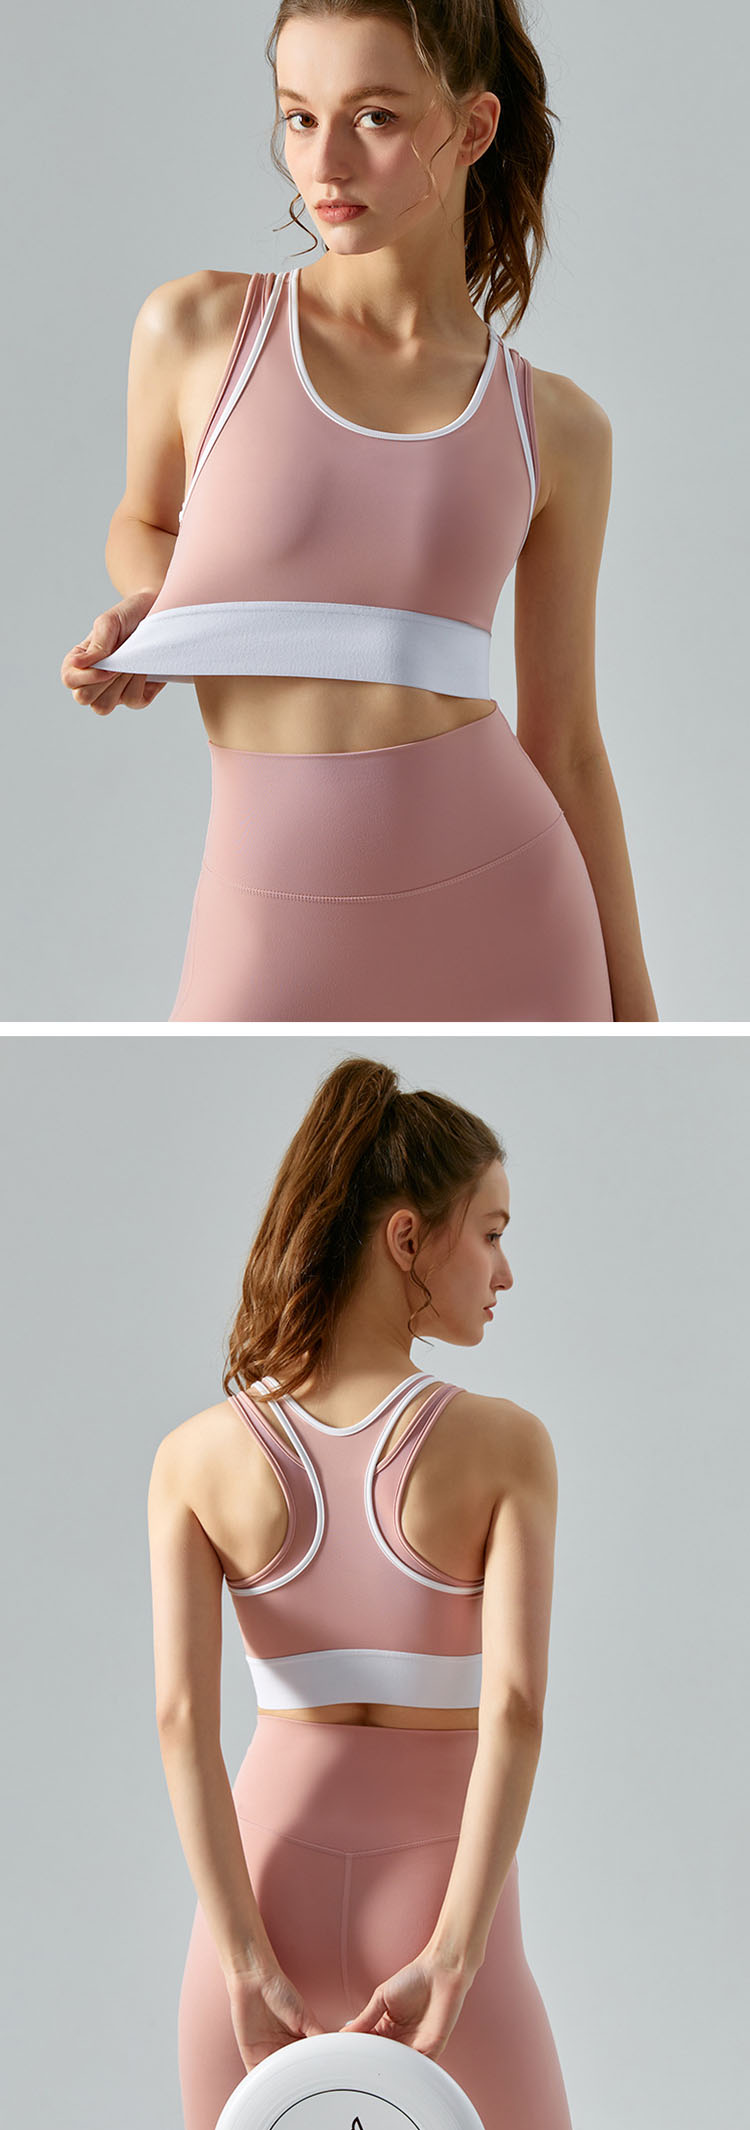 The underskirt adopts elastic design, which tightens the waistline, flexibly shapes and reduces the tightness